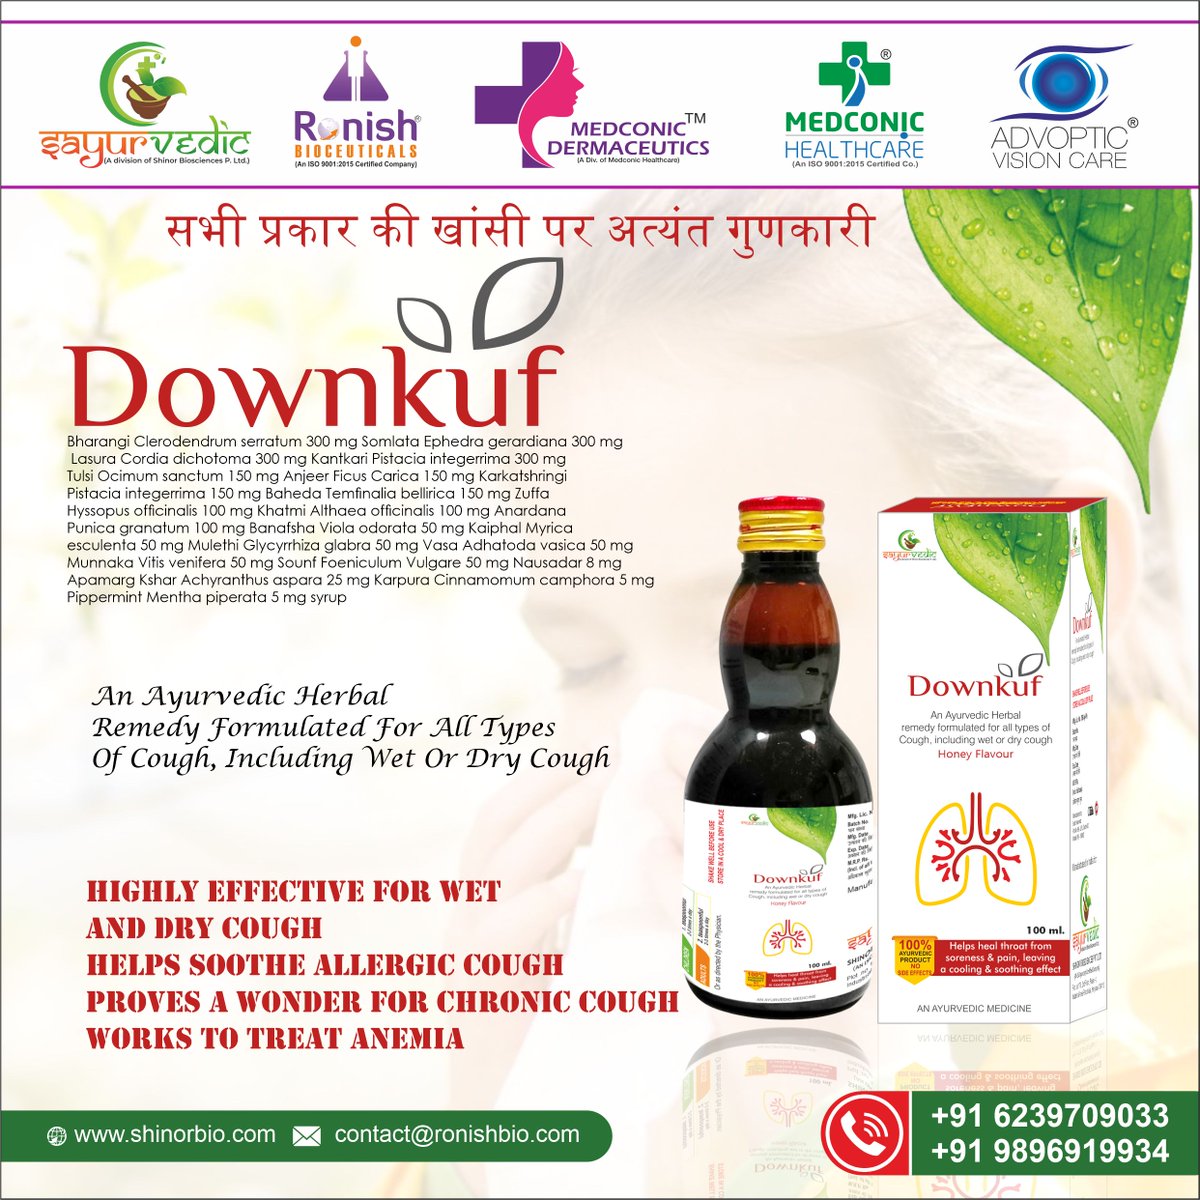 Introducing Downkuf Syrup,

A powerful blend of natural ingredients to relieve cough and cold symptoms. 

#Sayurvedic #Downkuf #NaturalRemedy #PCDPharma #FranchiseOpportunity #HealthyLiving #HerbalMedicine #CoughRelief #ColdRelief #Ayurveda #Wellness #Healthcare